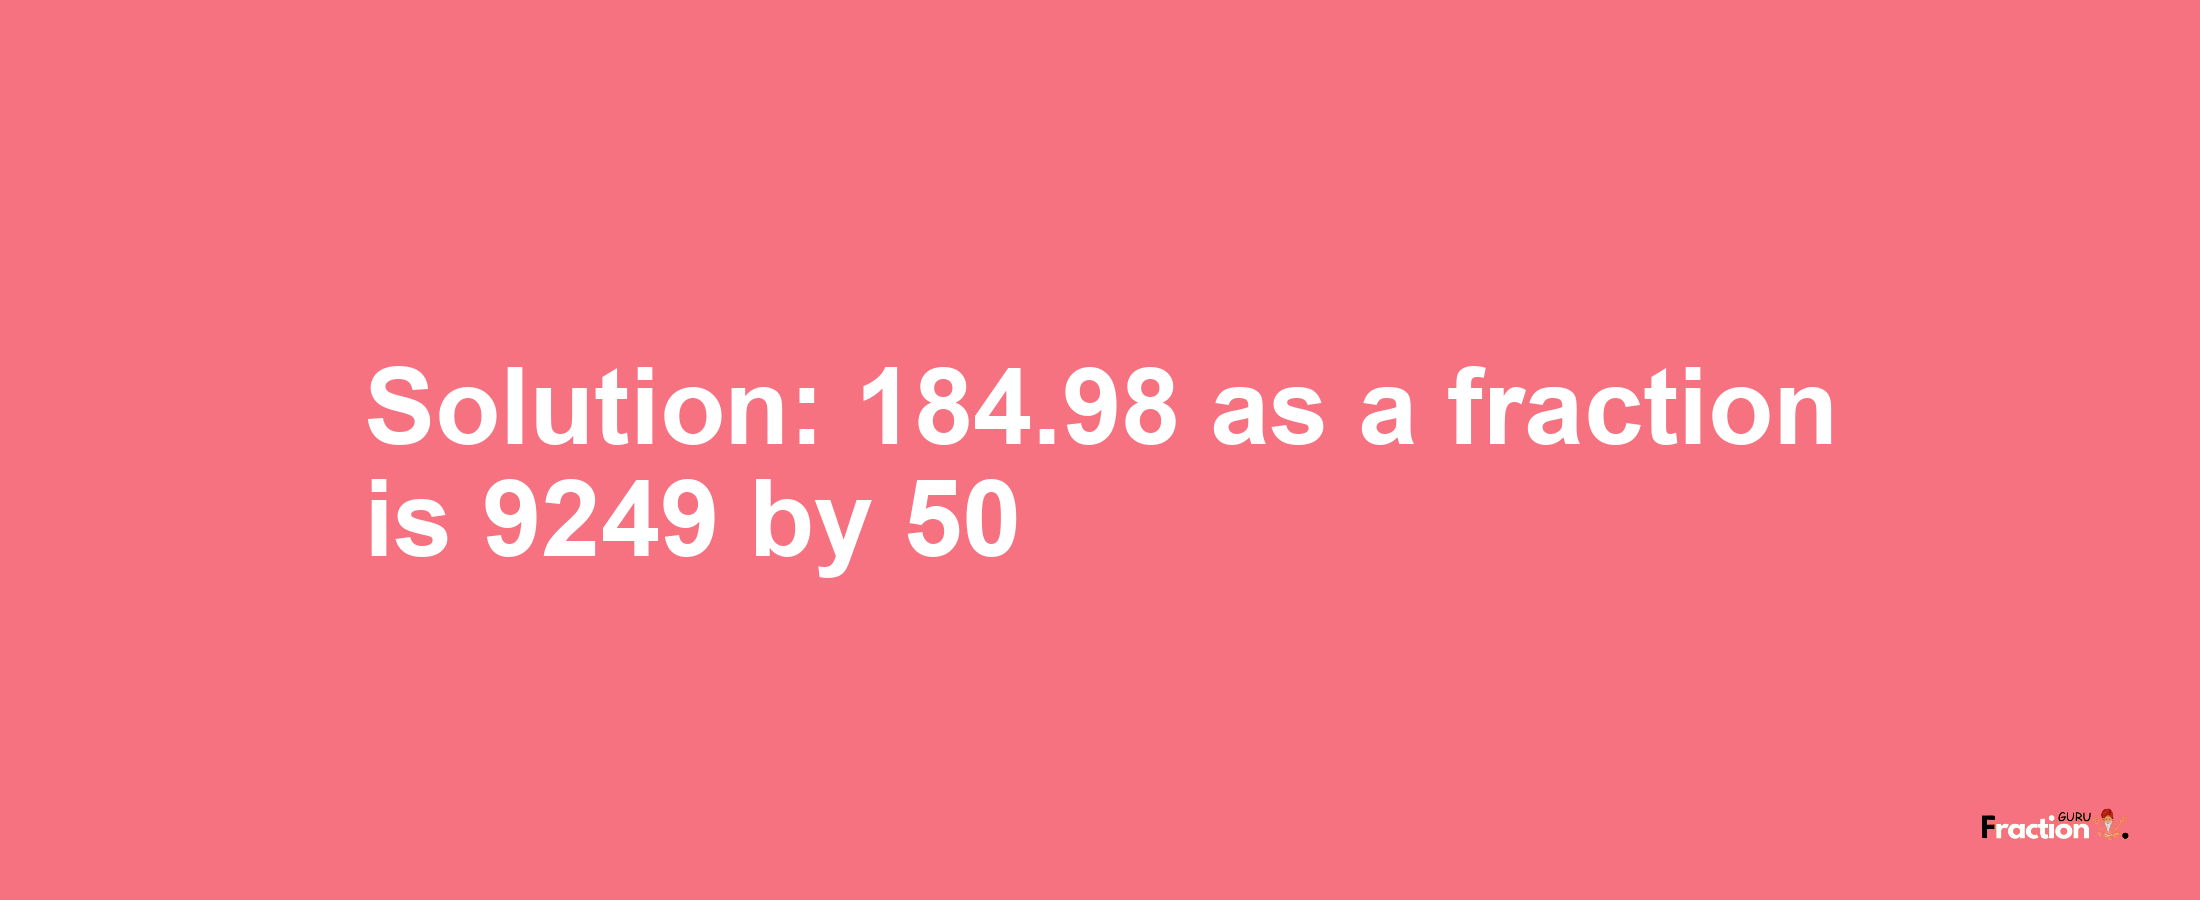 Solution:184.98 as a fraction is 9249/50